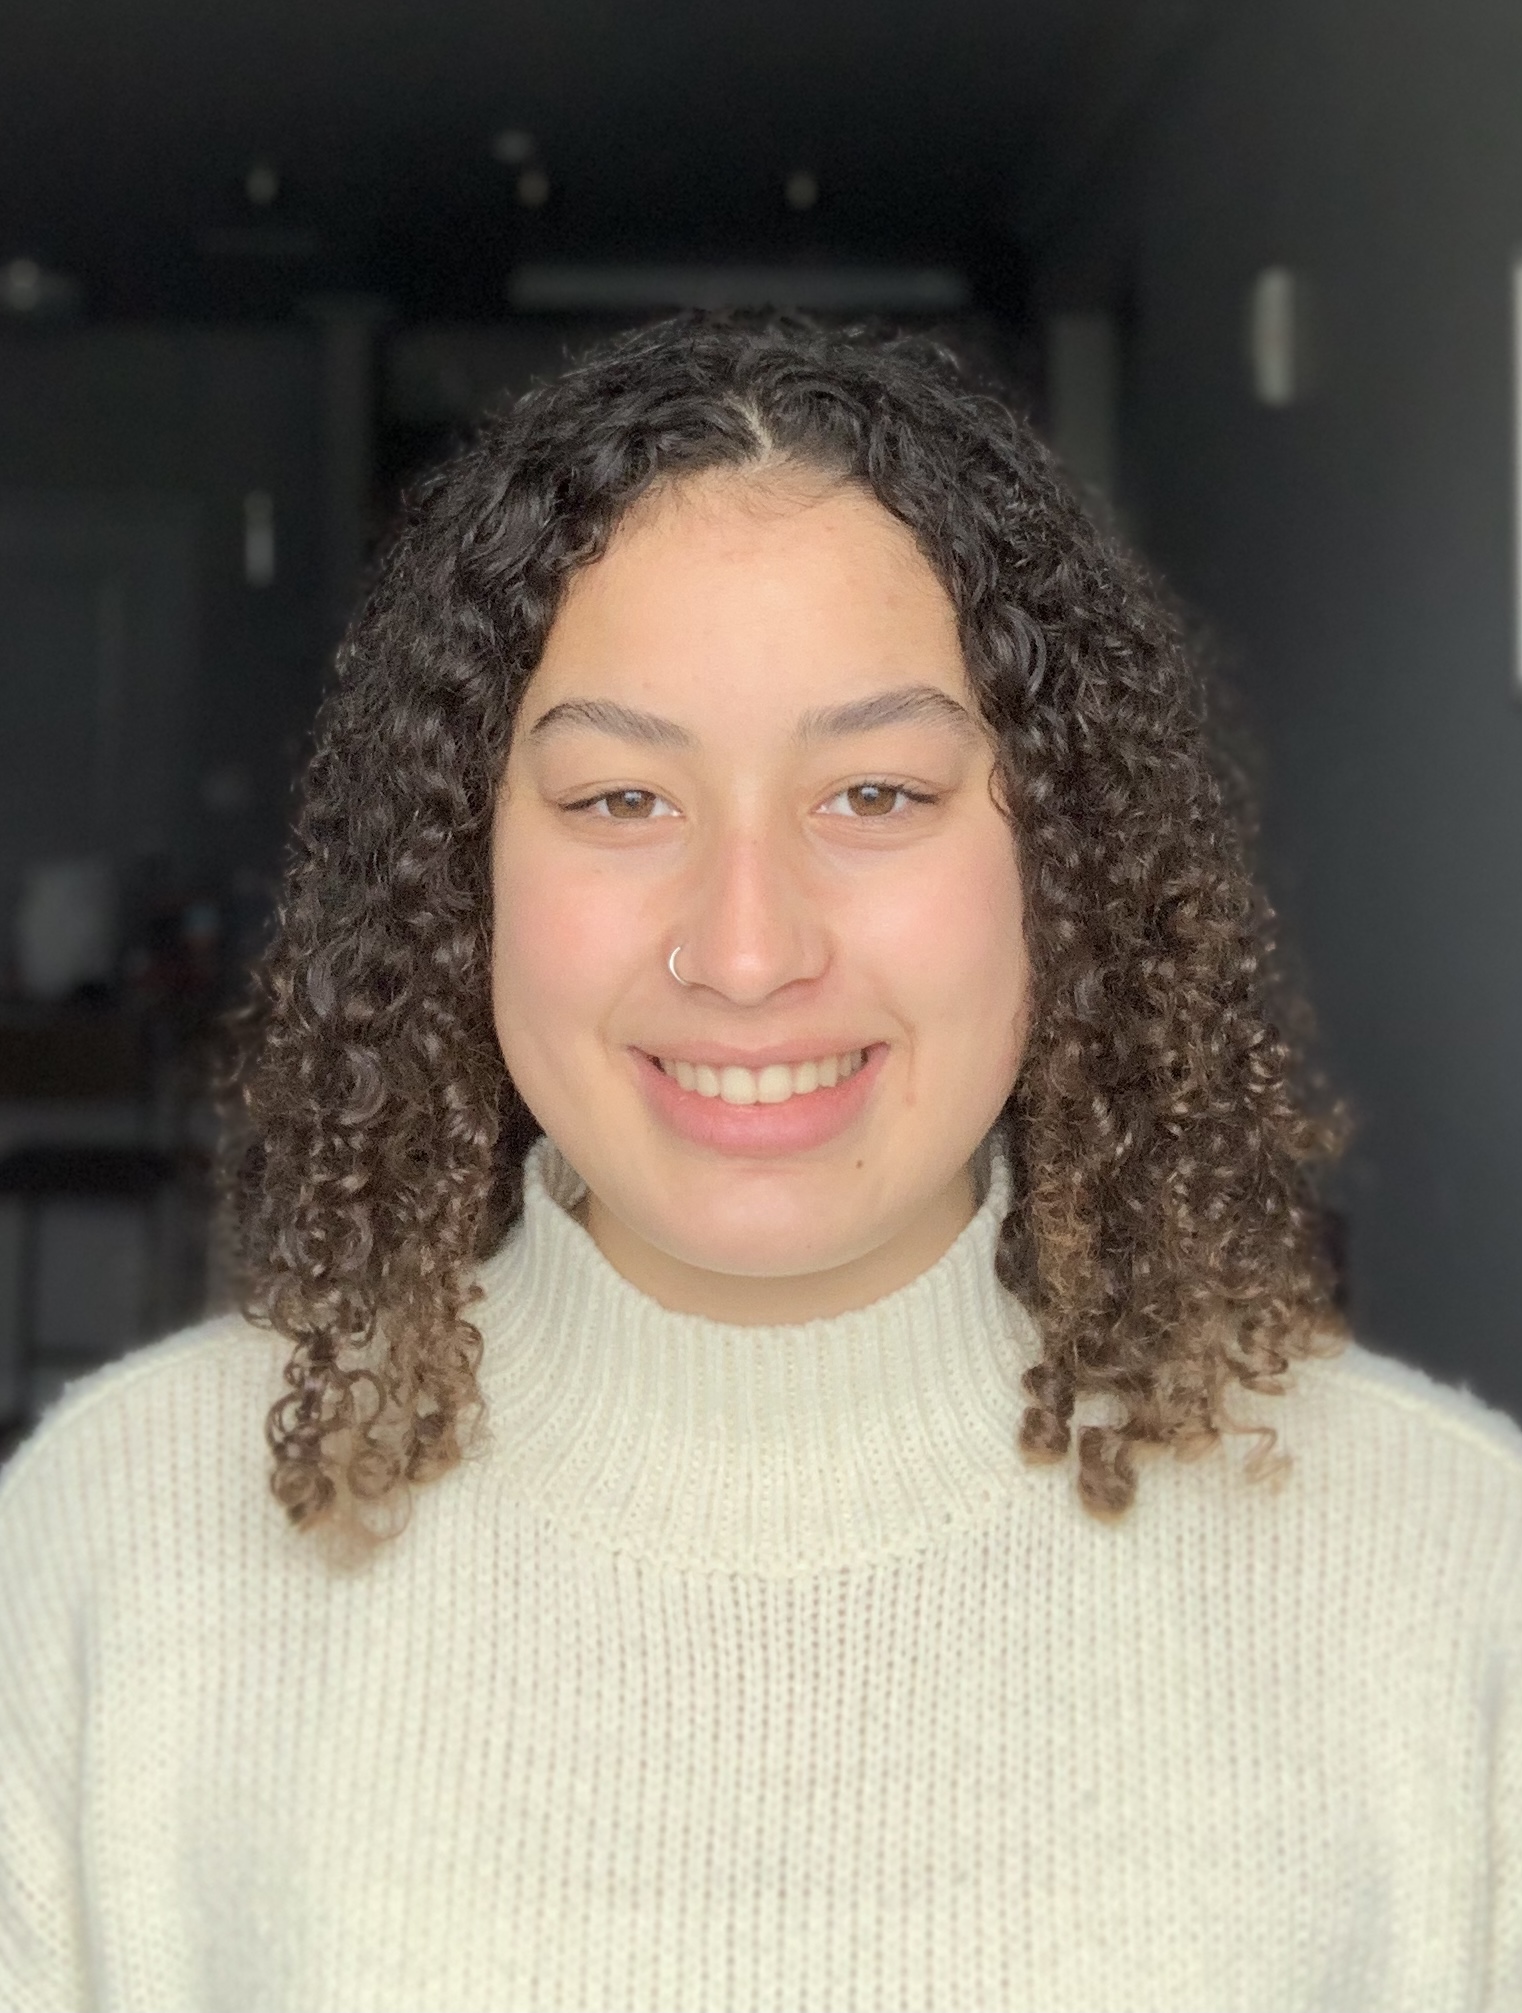 Curly haired female student smiling